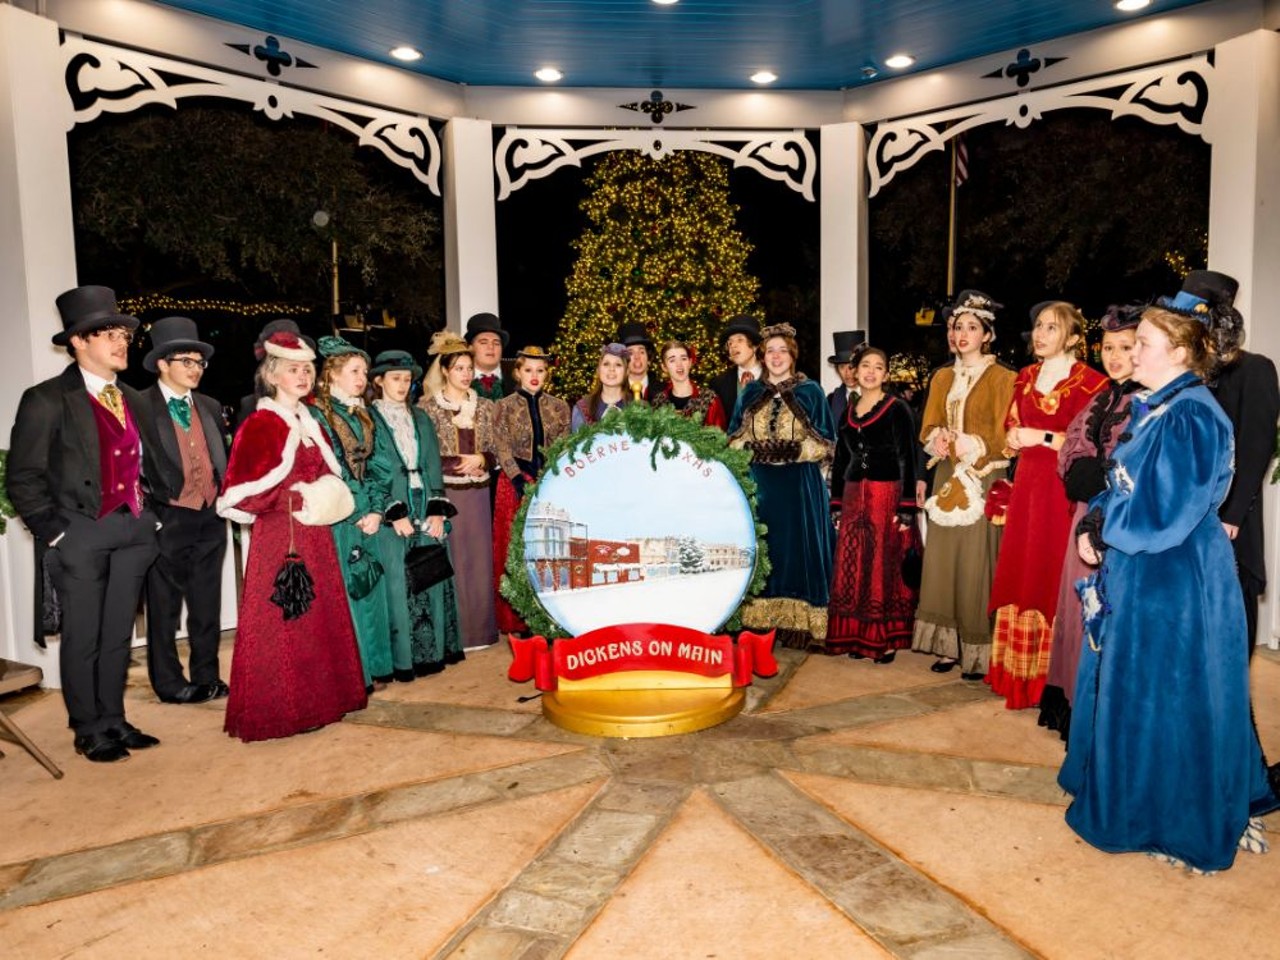 Head up to Boerne for Dickens on Main
On Thanksgiving weekend each year, Boerne transforms into a Victorian wonderland with Dickens on Main. The event kicks off four weekends of Yuletide shopping and fun, which wrap up with Kinder Fest Dec. 15-17. Wander back in time and enjoy the fun.